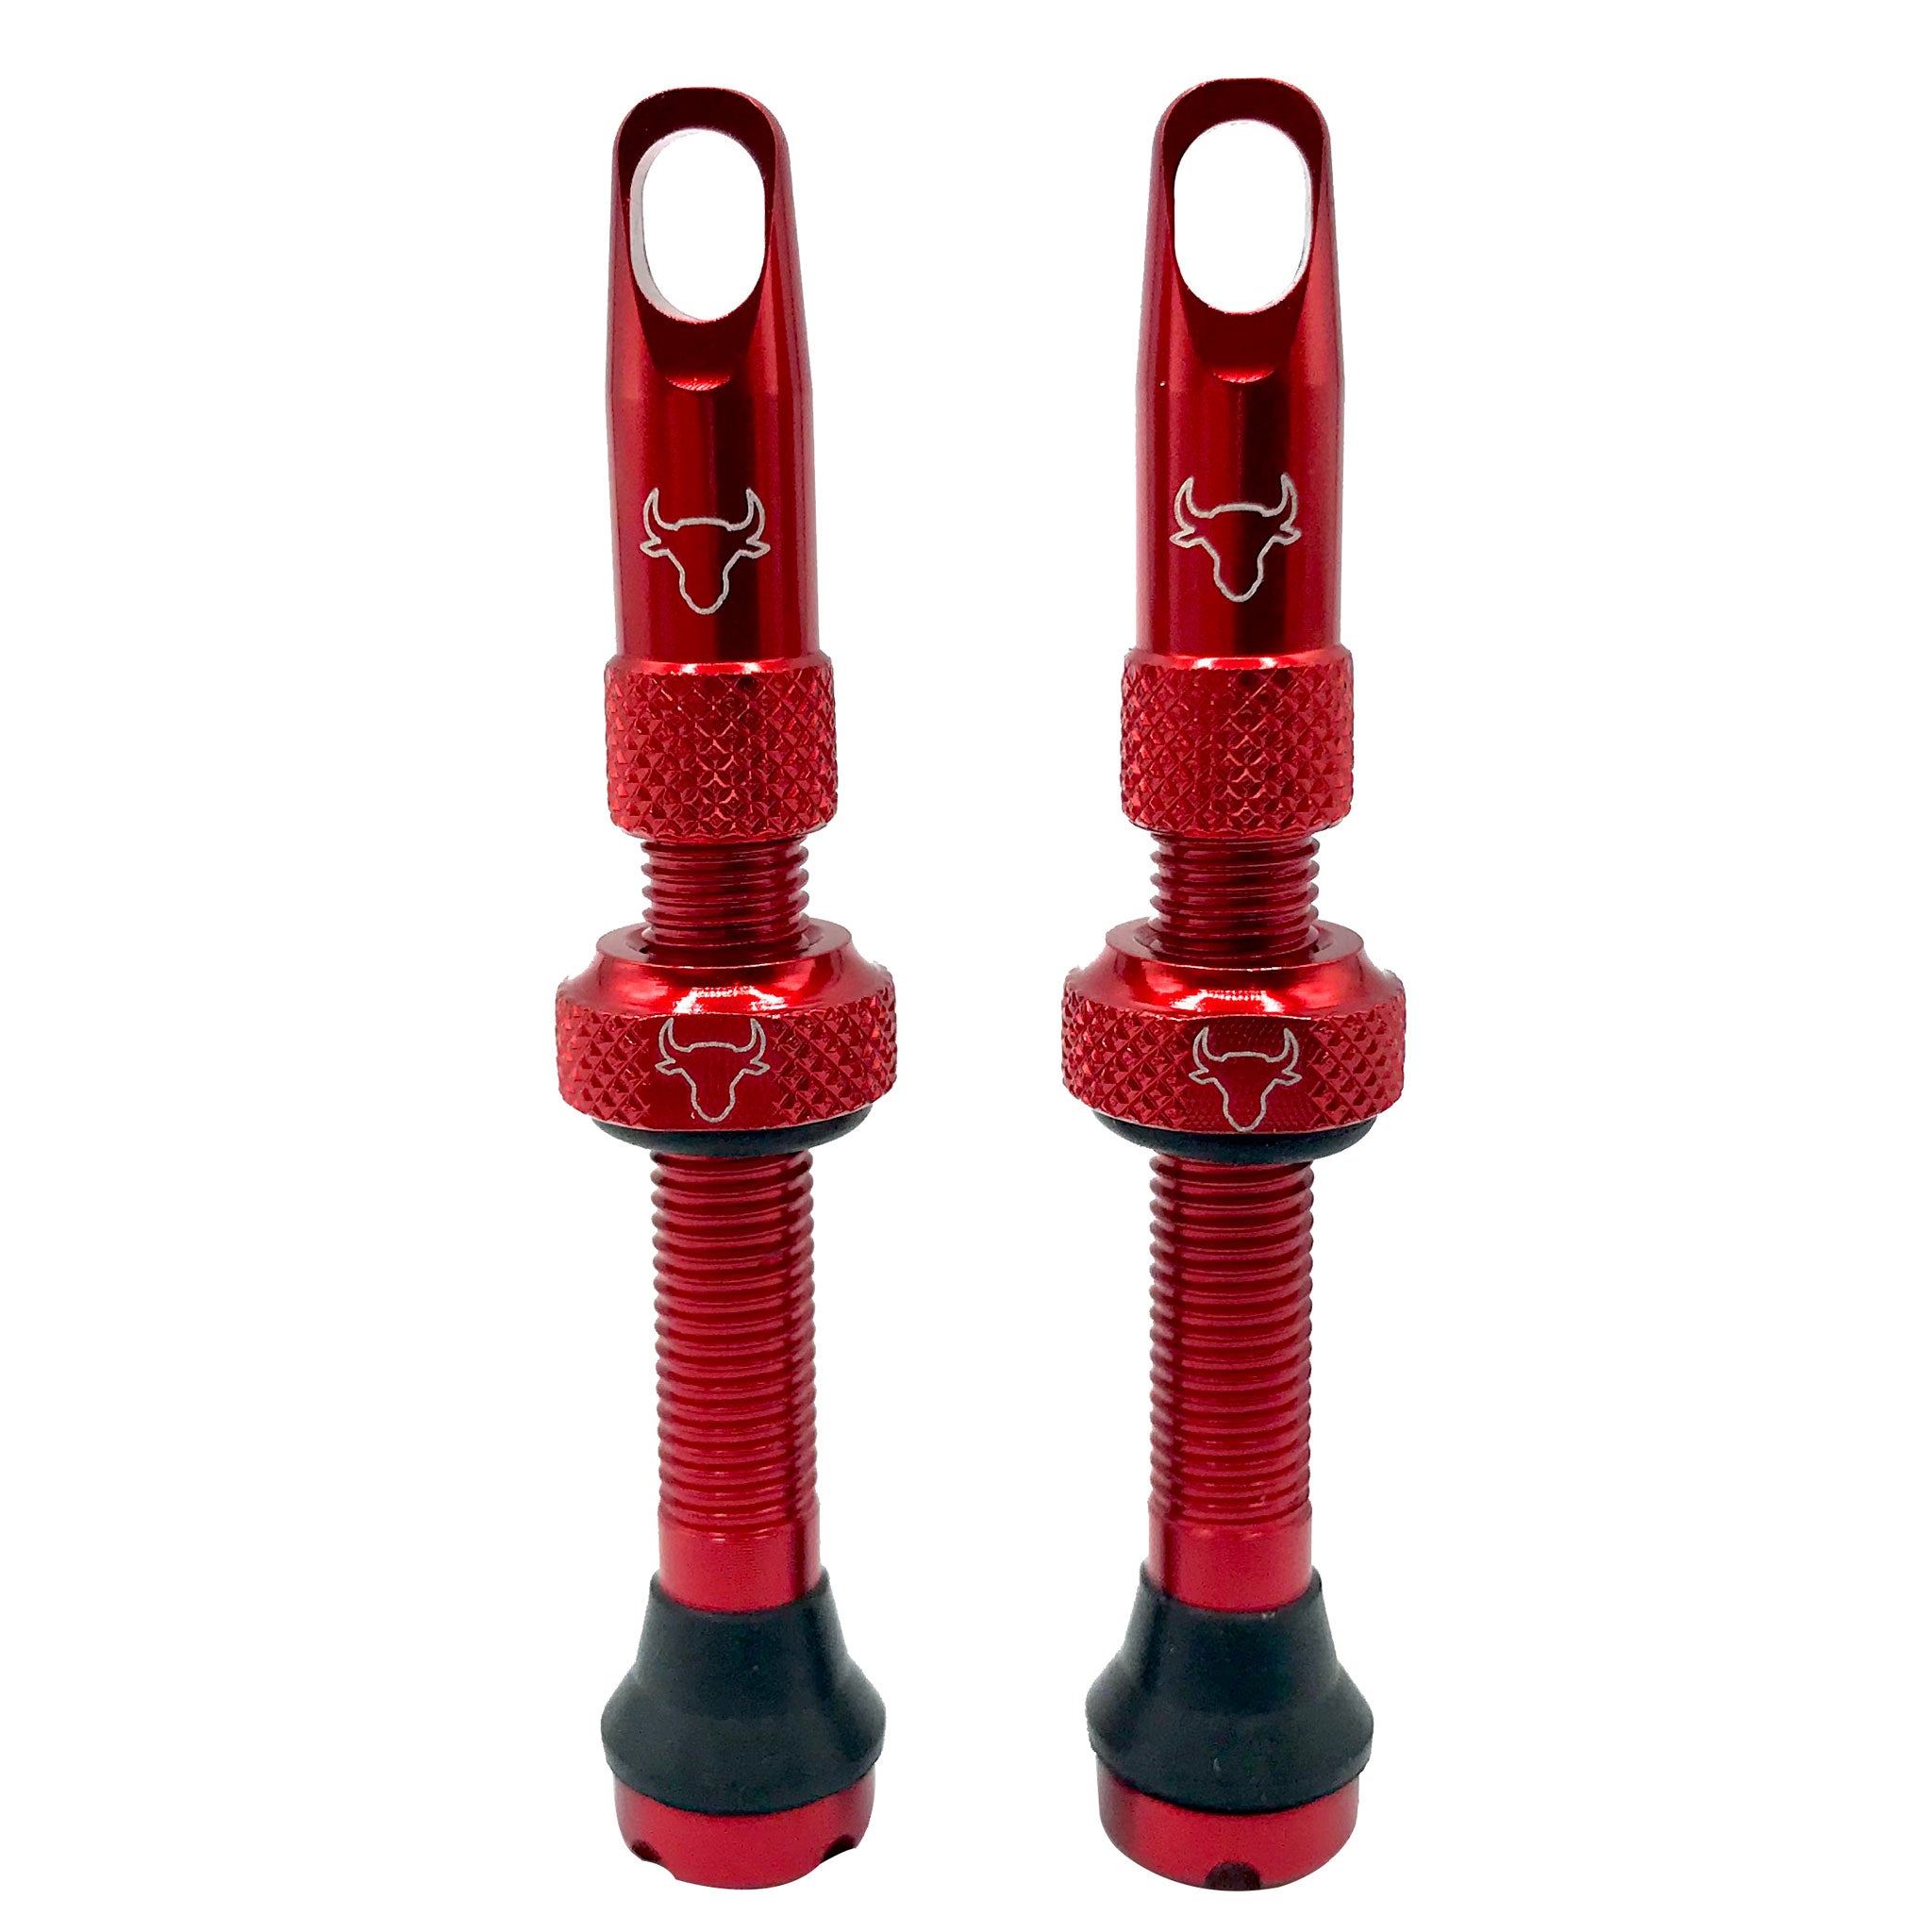 Hold Fast Cycling Tubeless Valve Stem 42mm (Pair) - Red